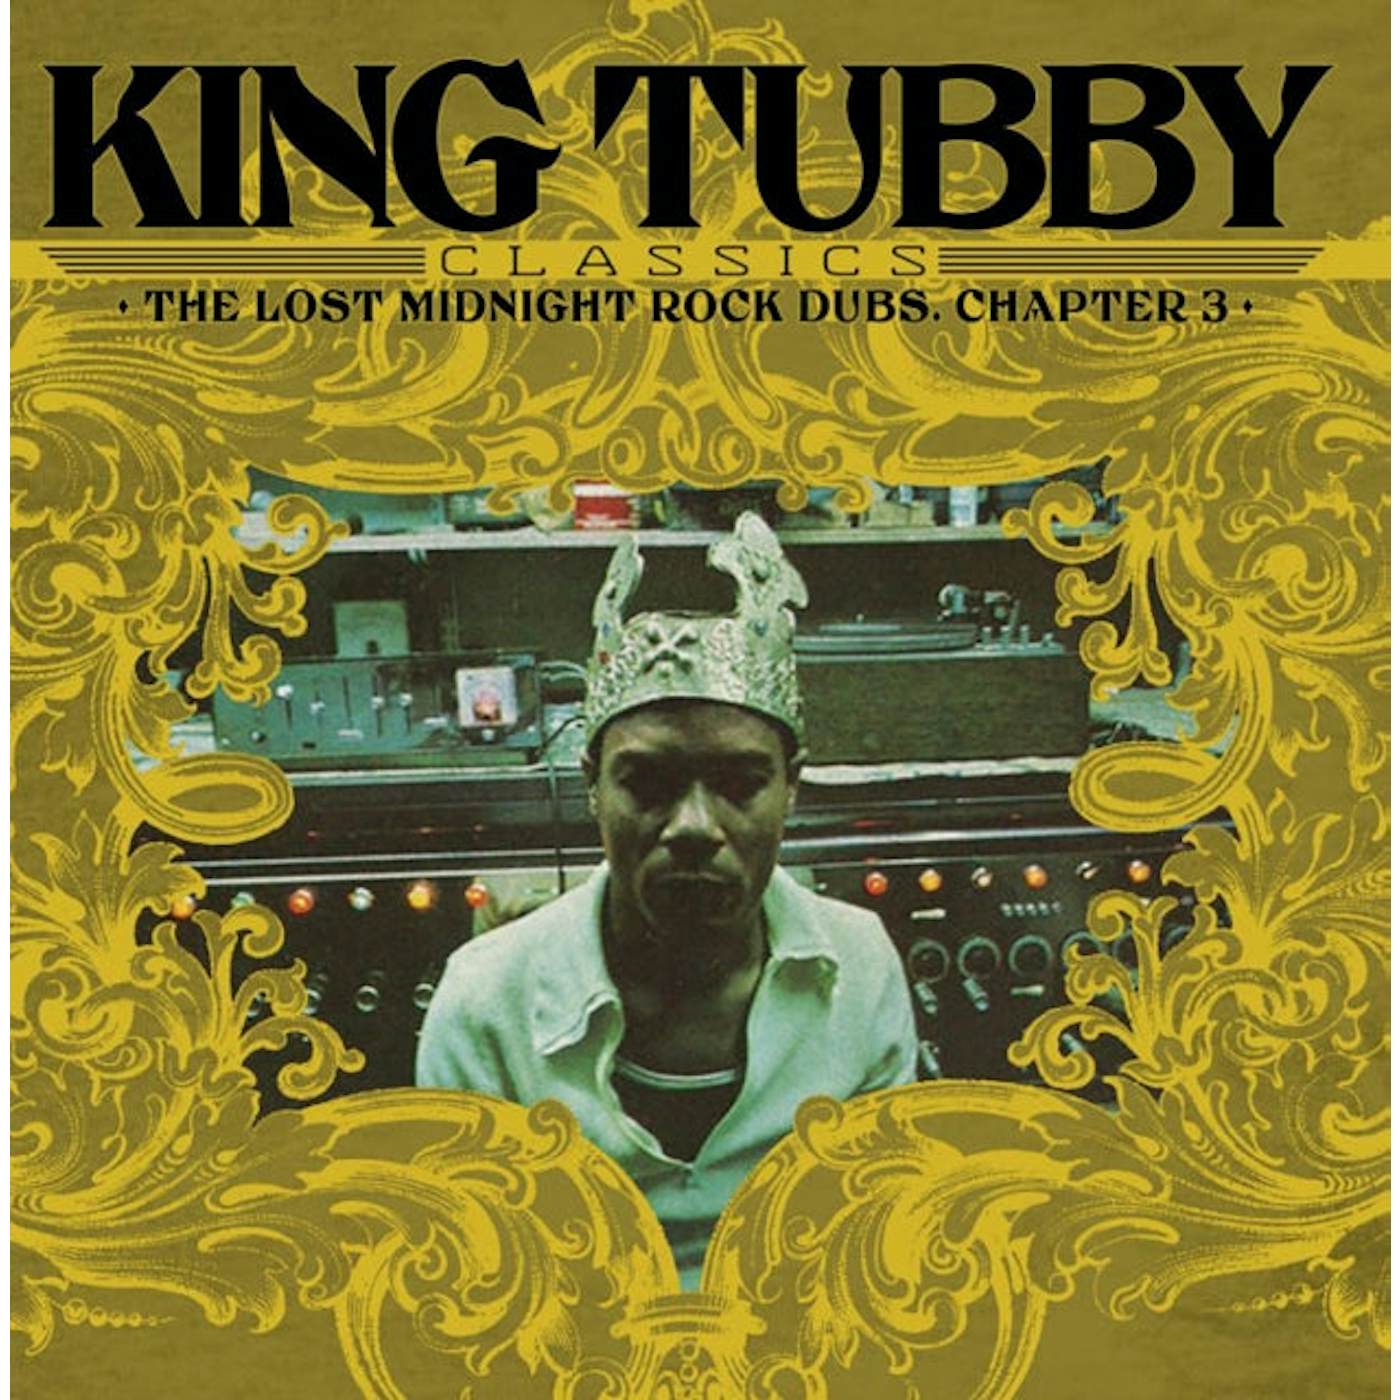 King Tubby LP Vinyl Record - King Tubby's Classics: The Lost Midnight Rock Dubs Chapter 3